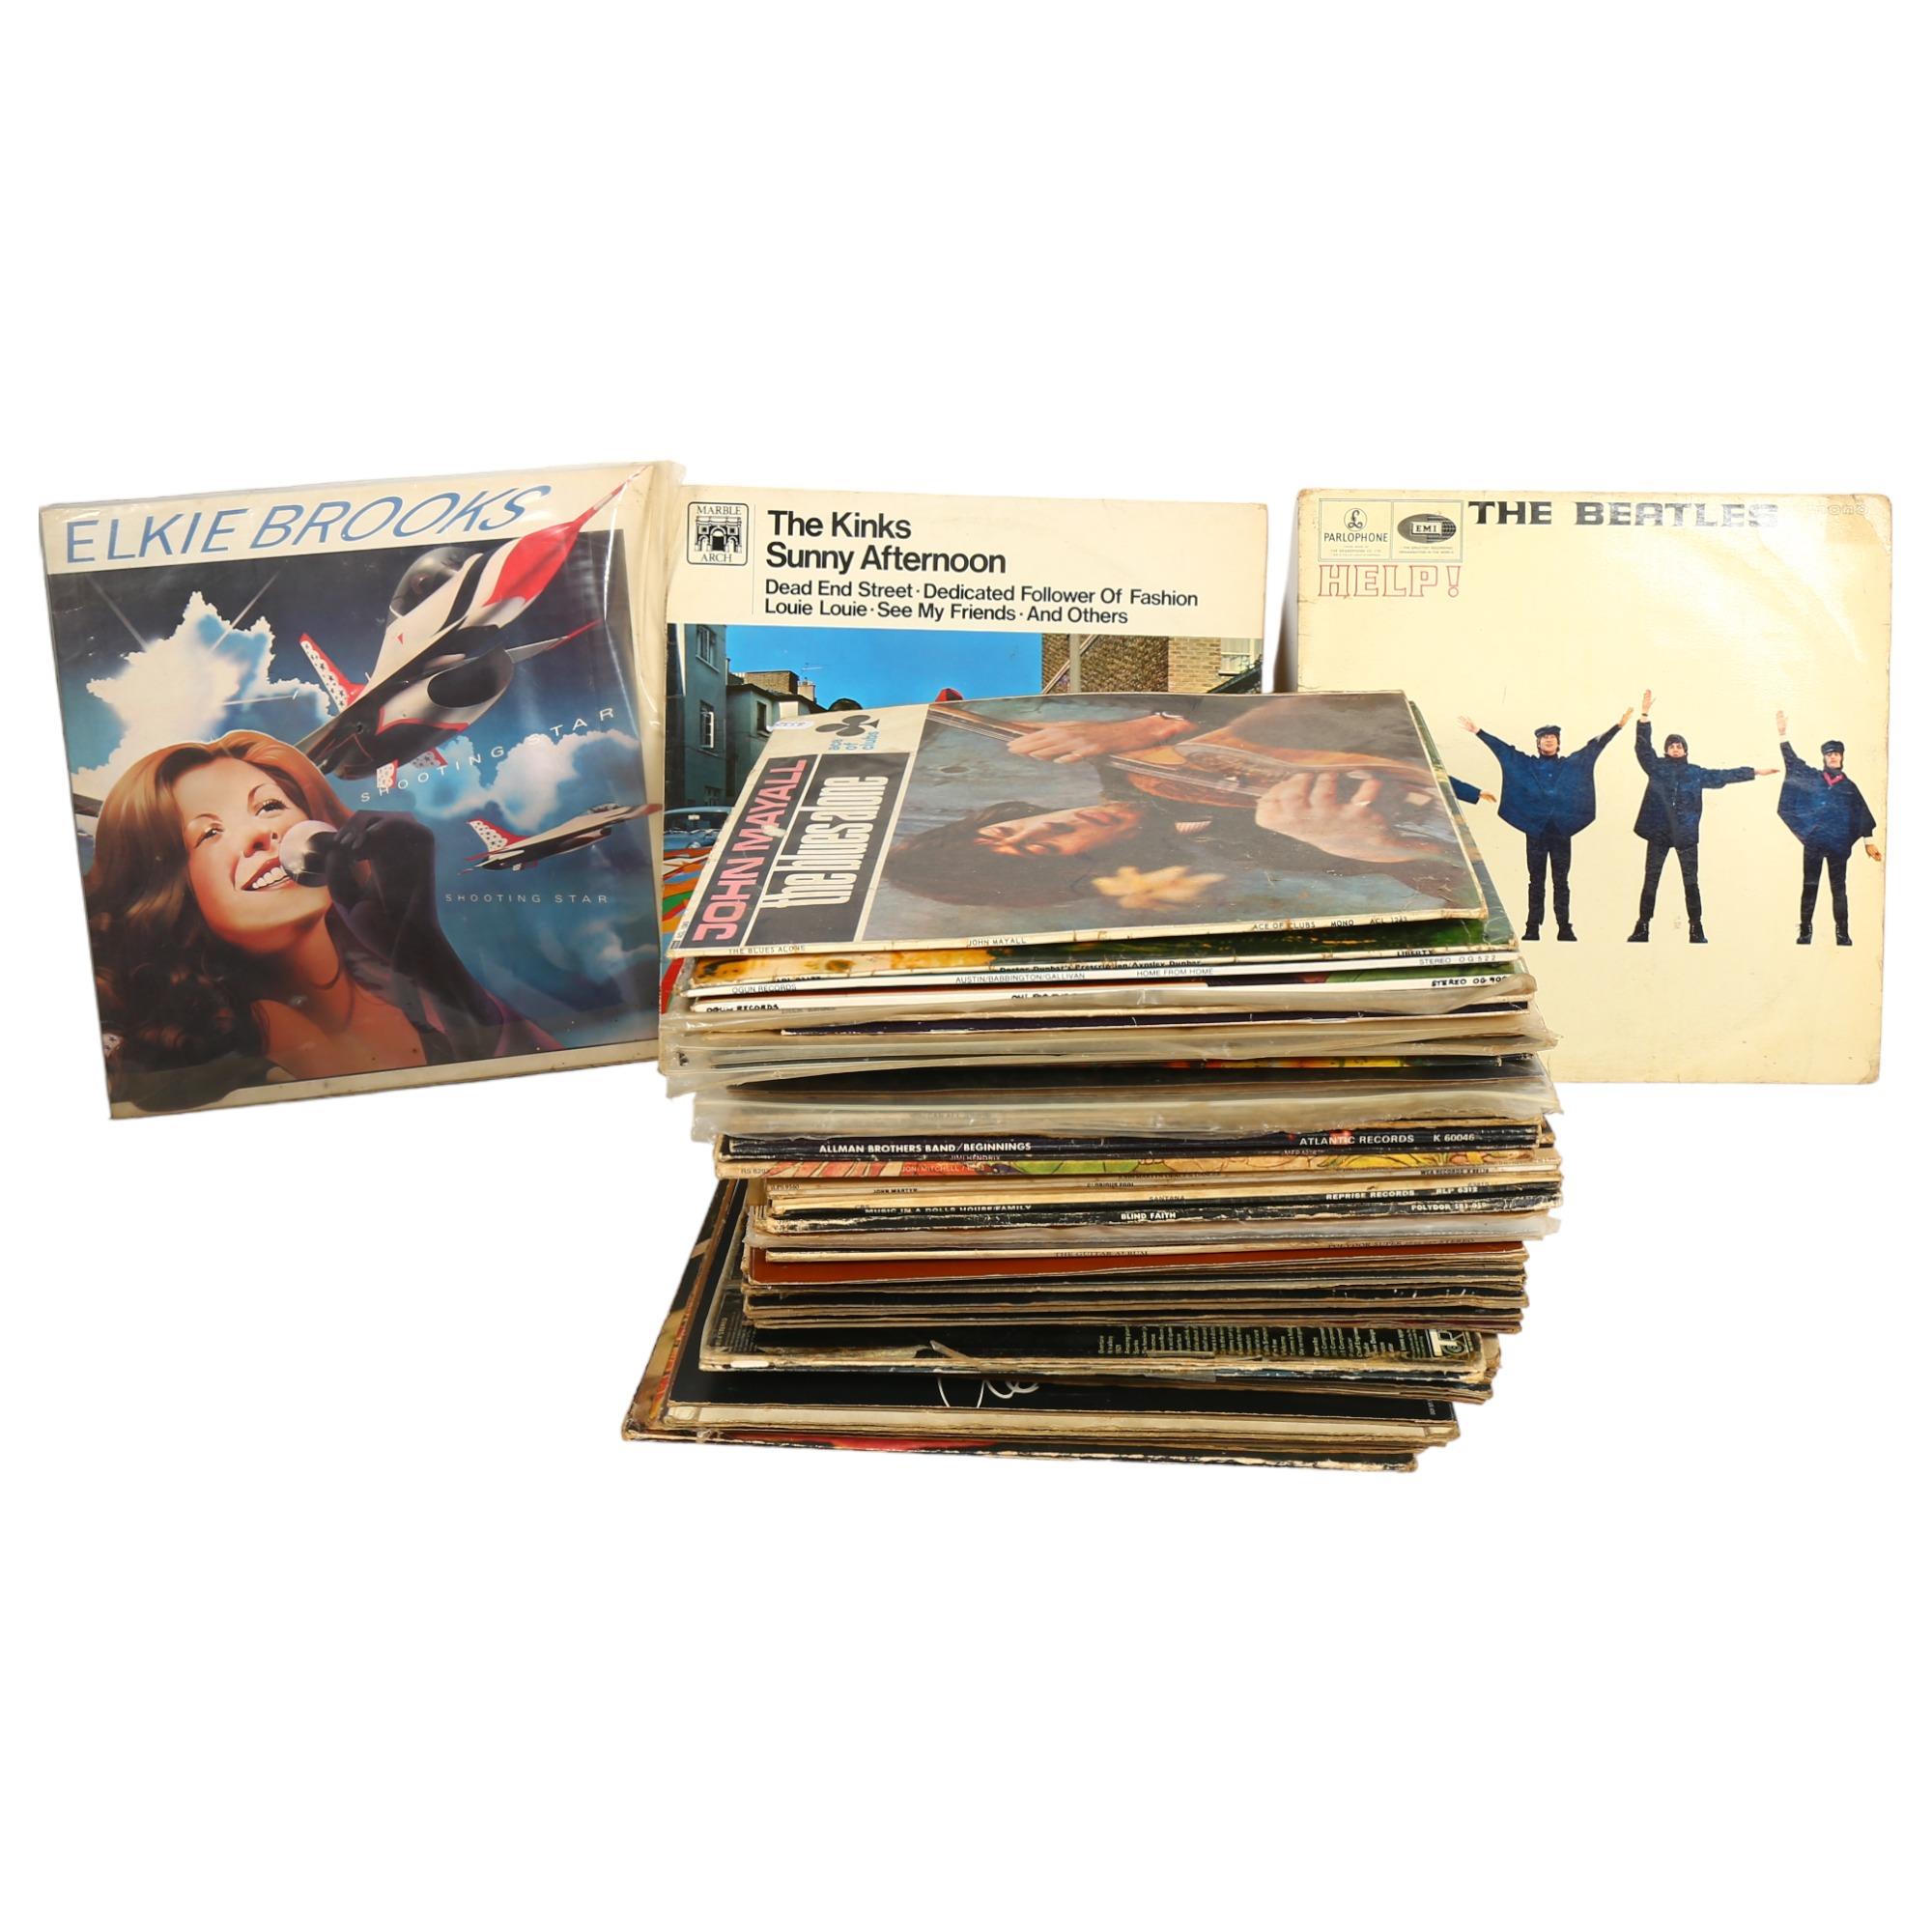 A quantity of vinyl LPs, including various artists such as the Beatles, The Jimi Hendrix Experience,